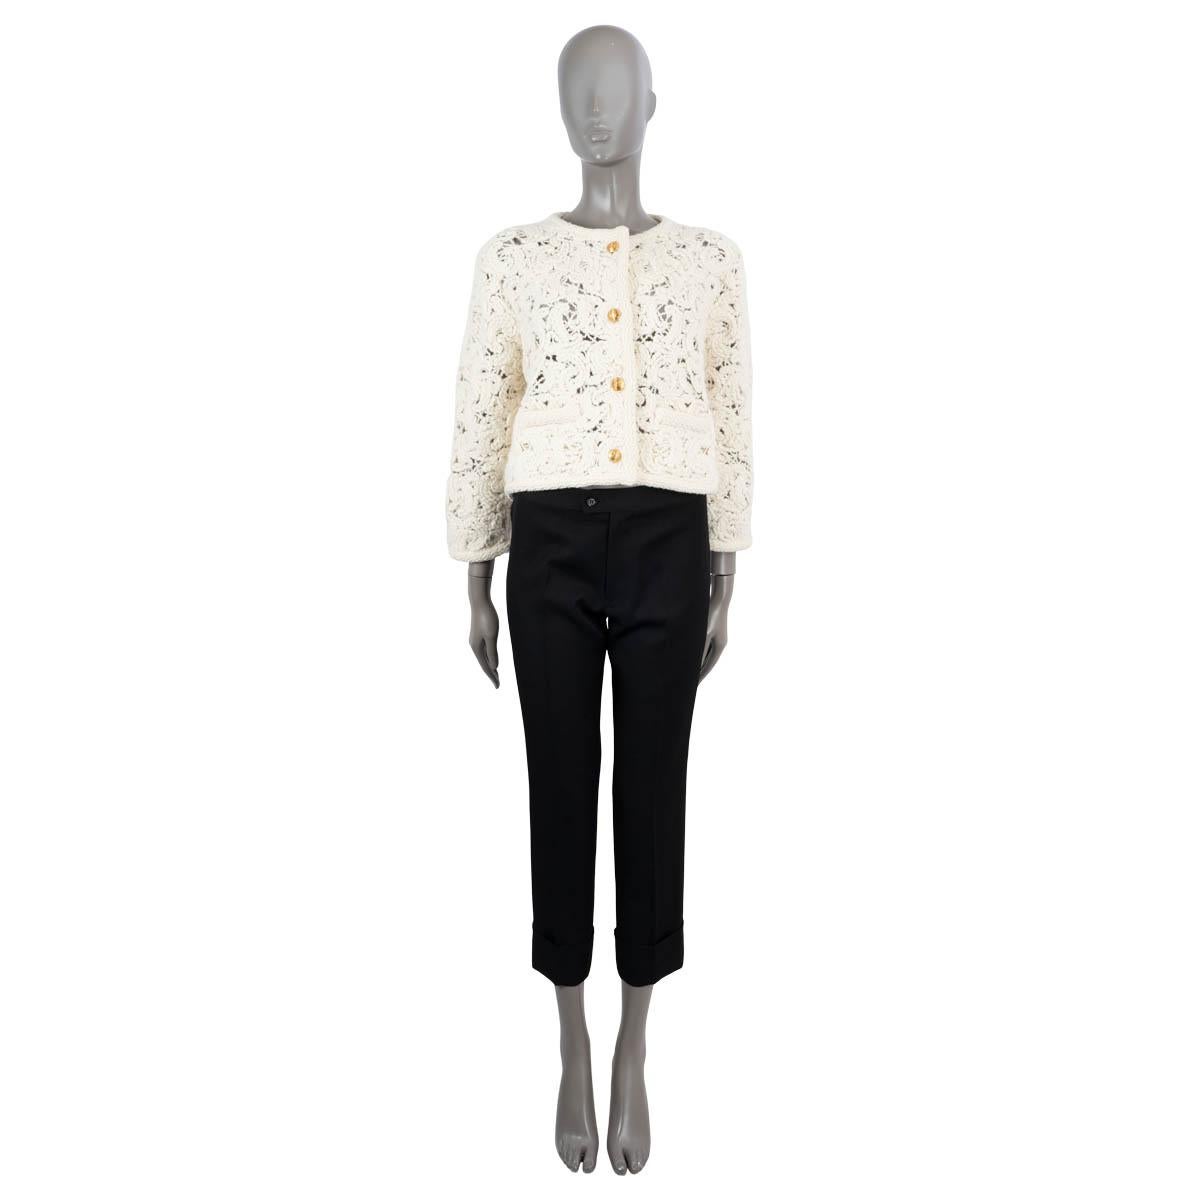 100% authentic Celine cornelly crochet jacket in ivory alpaca (62%), polyamide (21%), mohair (9%) and wool (8%). Features a crewneck, braided trim and two welt pockets. Closes with four gold-tone Celine Blason buttons. Unlined. Has been carried and